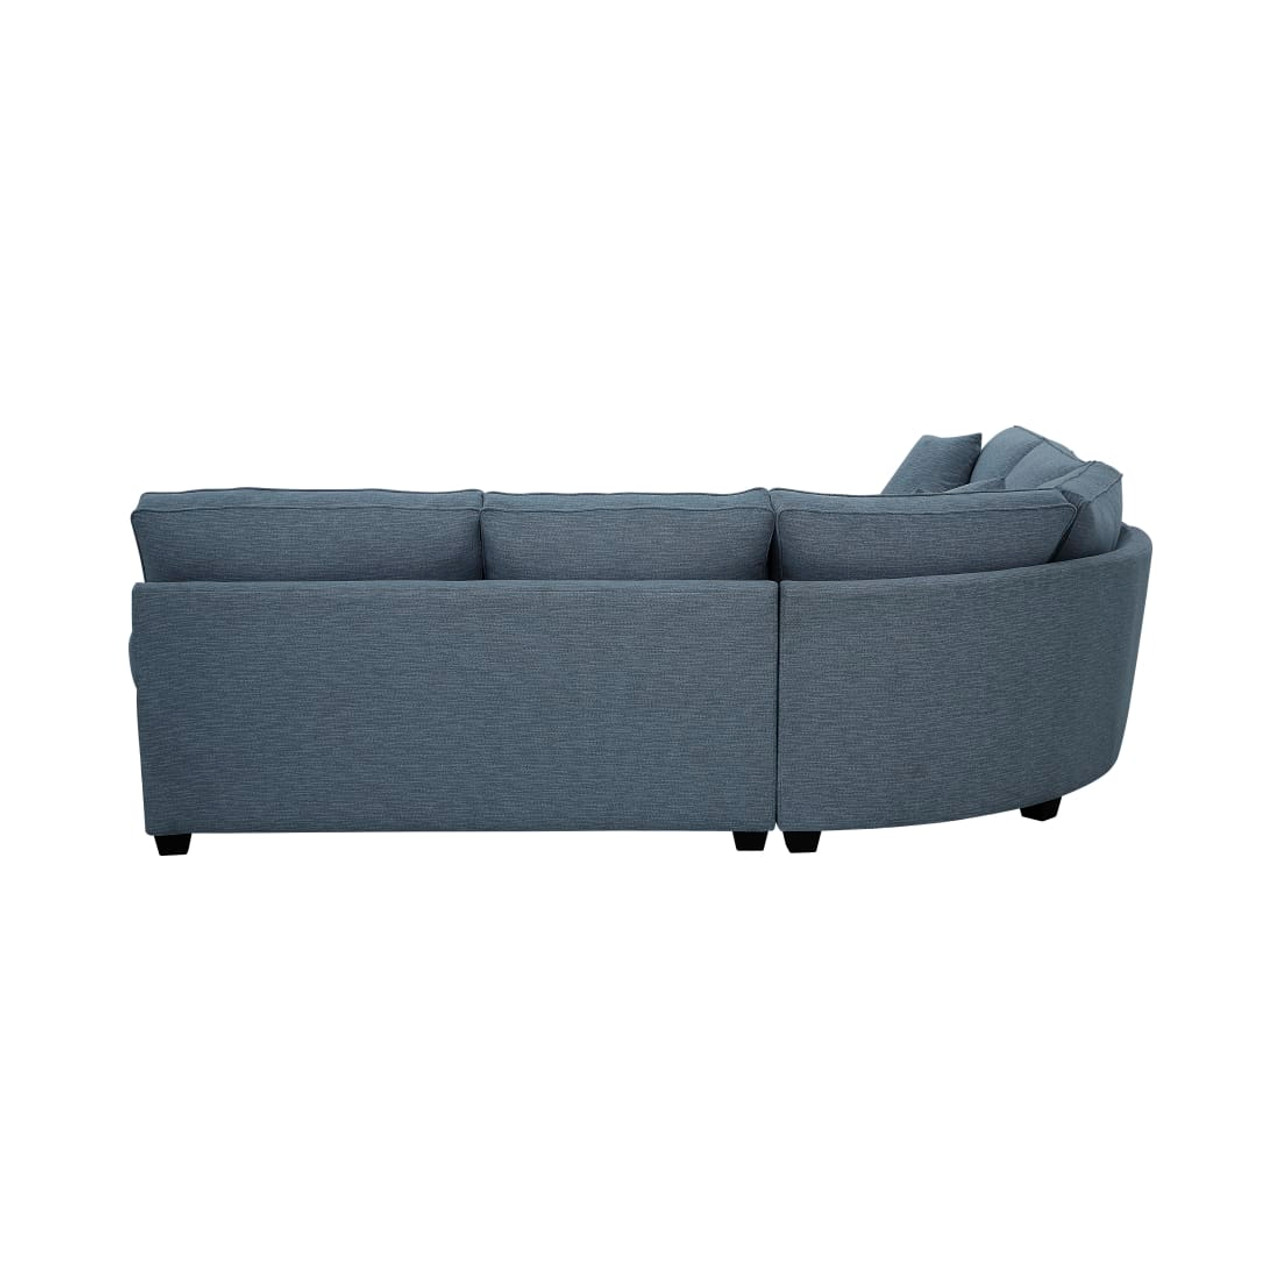 Crestview Rolled Arm Blue 3-pc Medium sectional